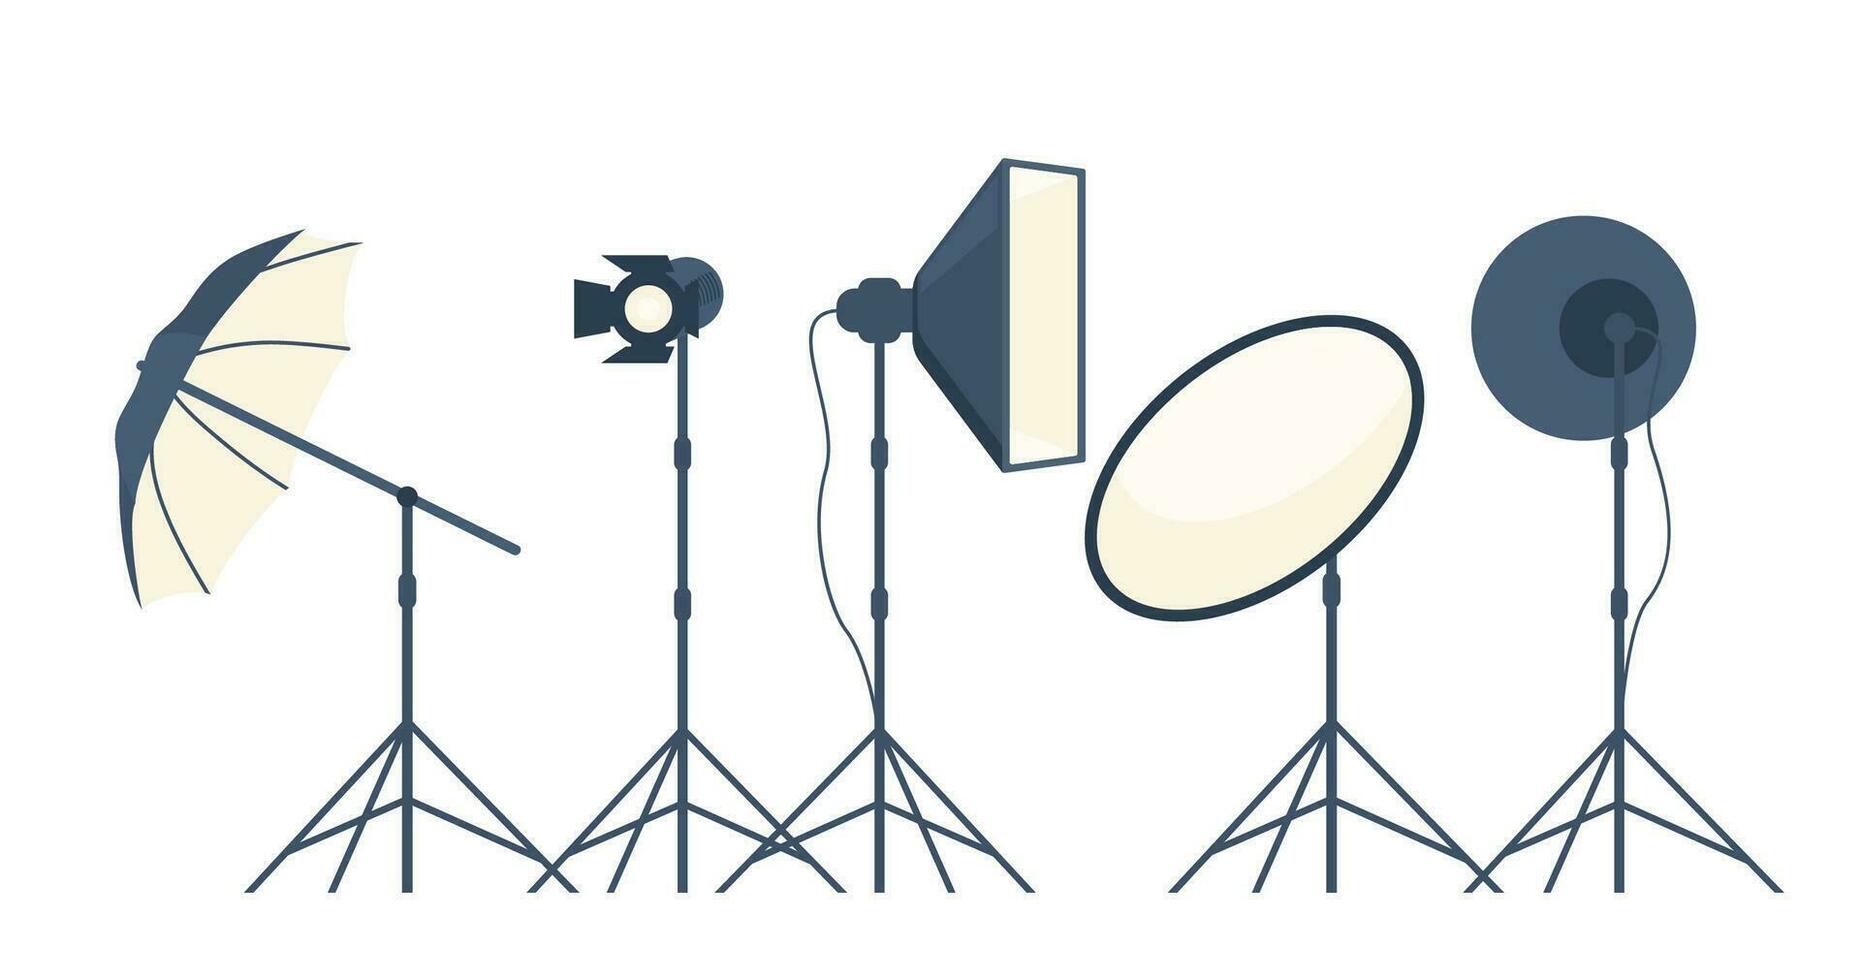 Different types of professional lighting equipment for blogging, vlogging and studio photo and video. Vector illustration.